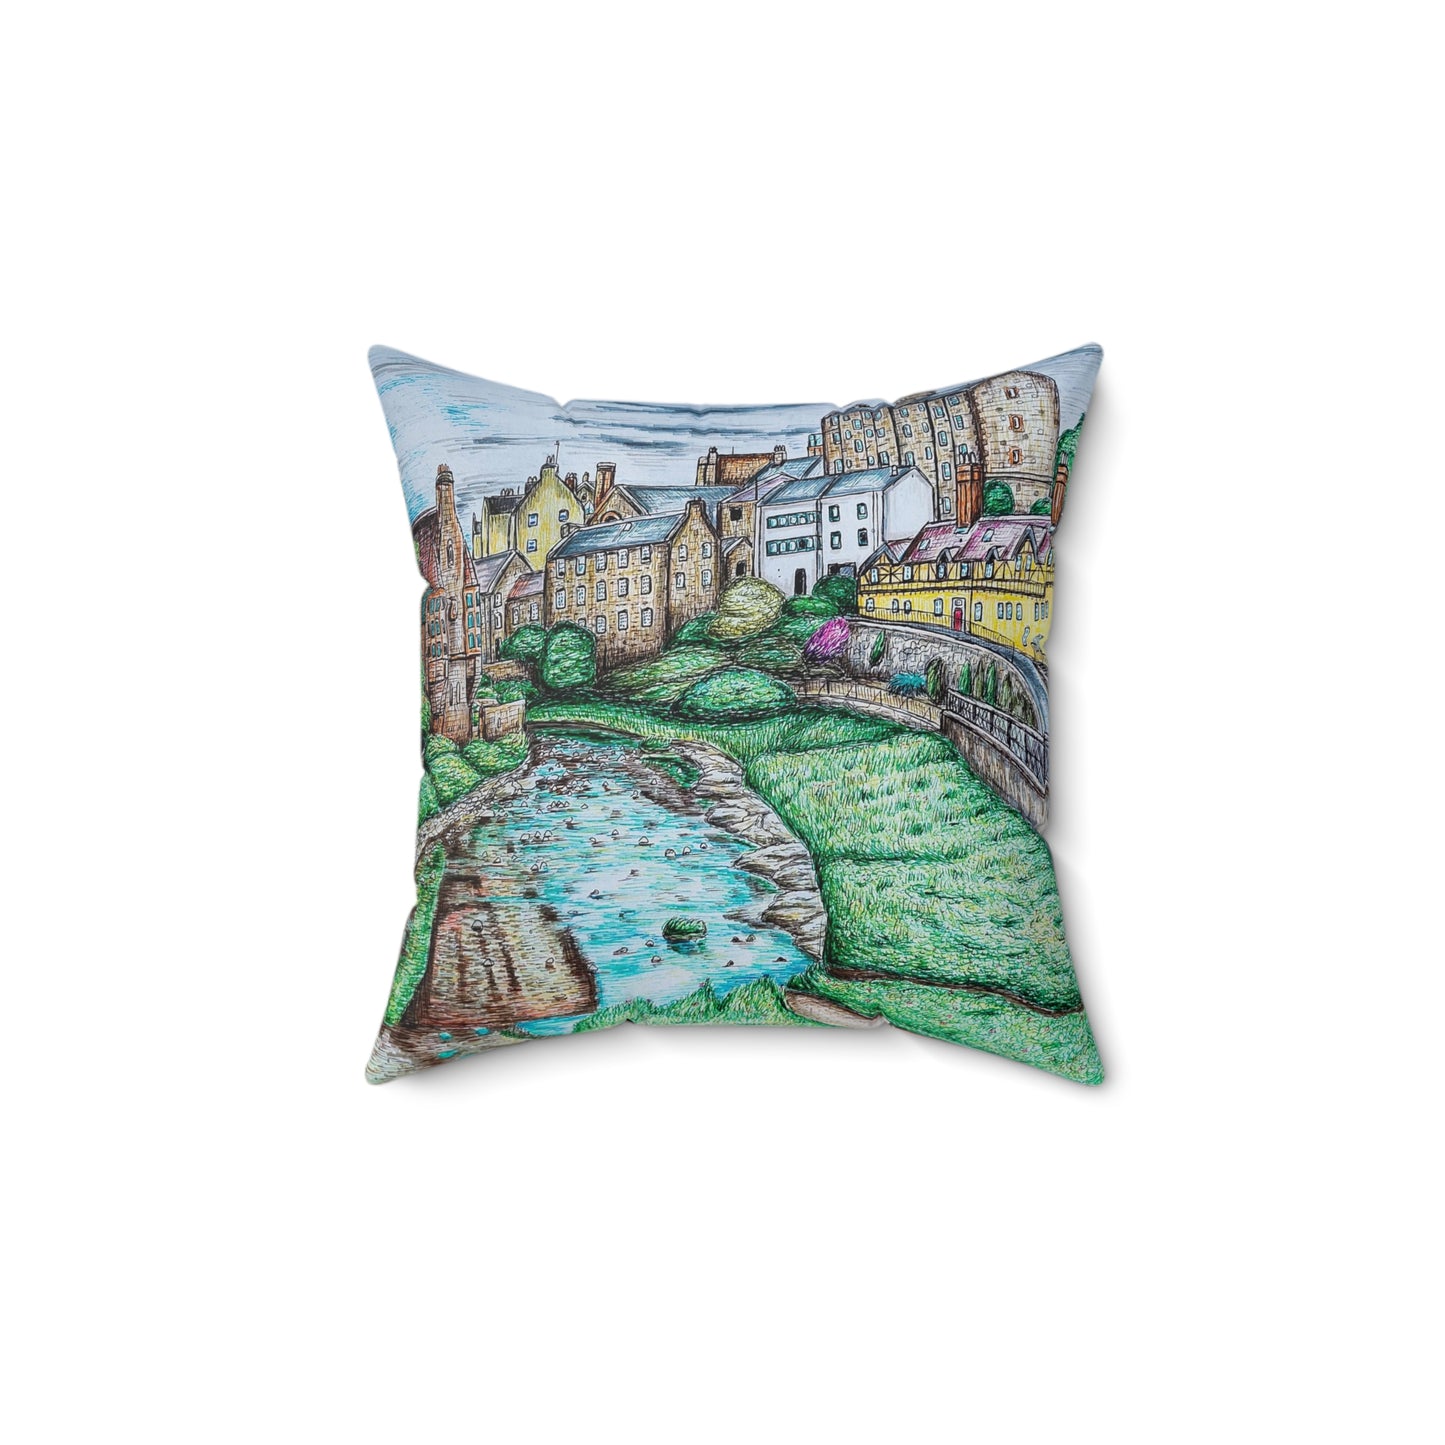 Polyester Square Pillow- Leith Waterway Walk Design